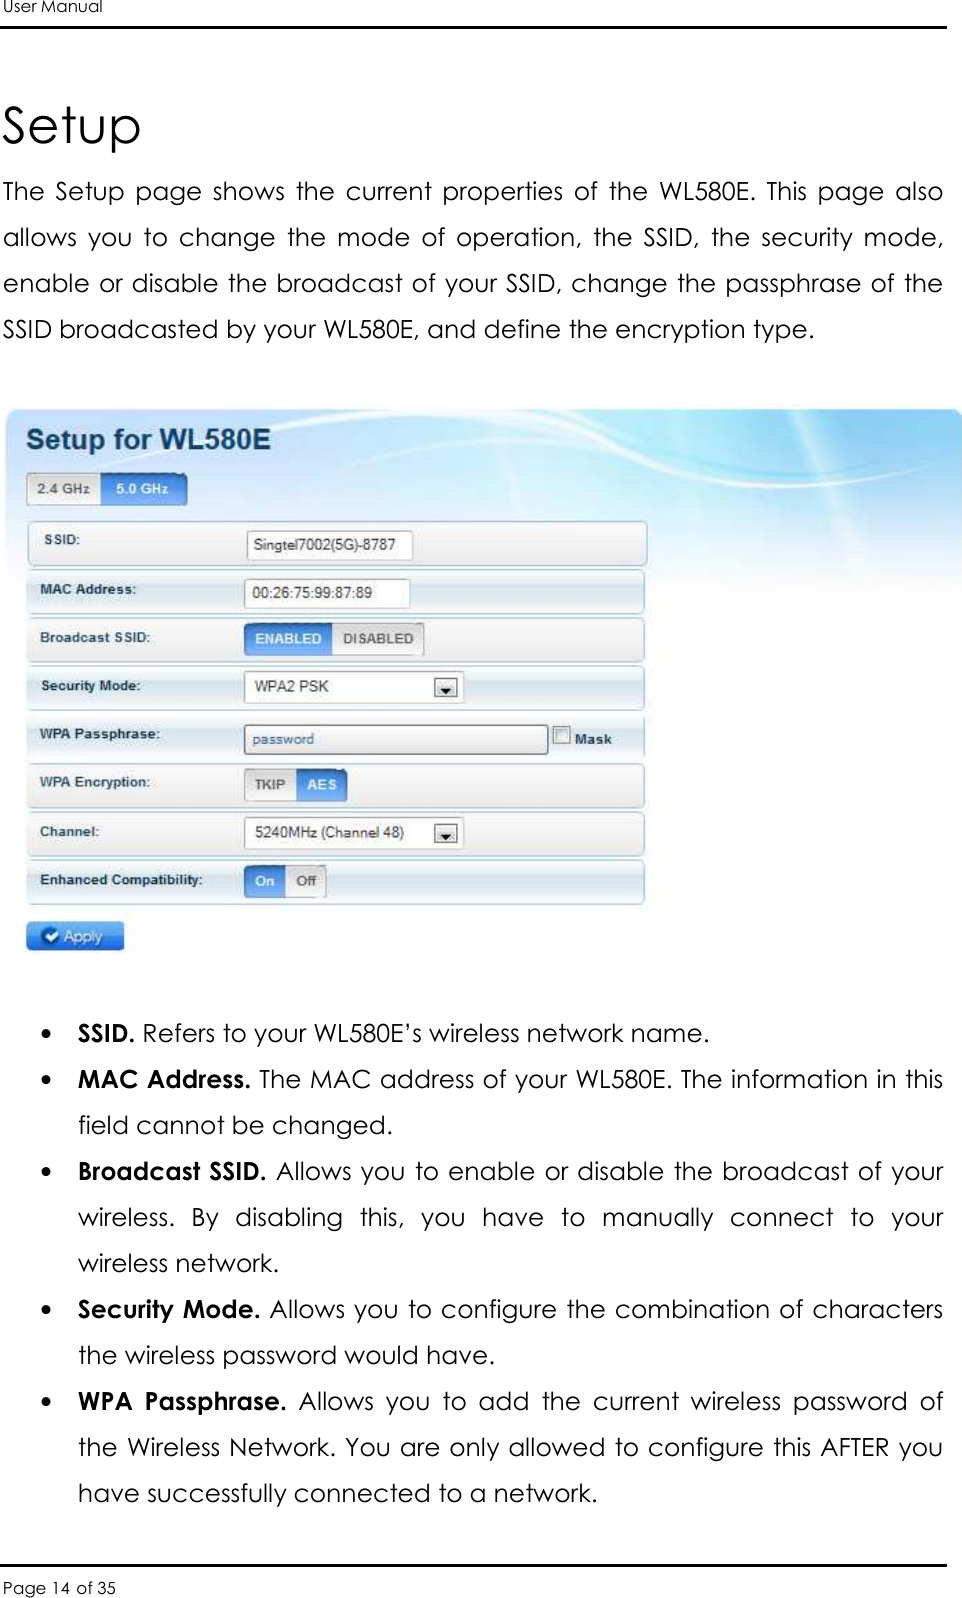 User Manual Page 14 of 35 Setup The  Setup  page  shows  the  current  properties  of  the  WL580E.  This  page  also allows  you  to  change  the  mode  of  operation,  the  SSID,  the  security  mode, enable or disable the broadcast of your SSID, change the passphrase of the SSID broadcasted by your WL580E, and define the encryption type.    • SSID. Refers to your WL580E’s wireless network name.  • MAC Address. The MAC address of your WL580E. The information in this field cannot be changed.  • Broadcast SSID. Allows you to enable or disable the broadcast of your wireless.  By  disabling  this,  you  have  to  manually  connect  to  your wireless network.  • Security Mode. Allows you to configure the combination of characters the wireless password would have.  • WPA  Passphrase.  Allows  you  to  add  the  current  wireless  password  of the Wireless Network. You are only allowed to configure this AFTER you have successfully connected to a network.  